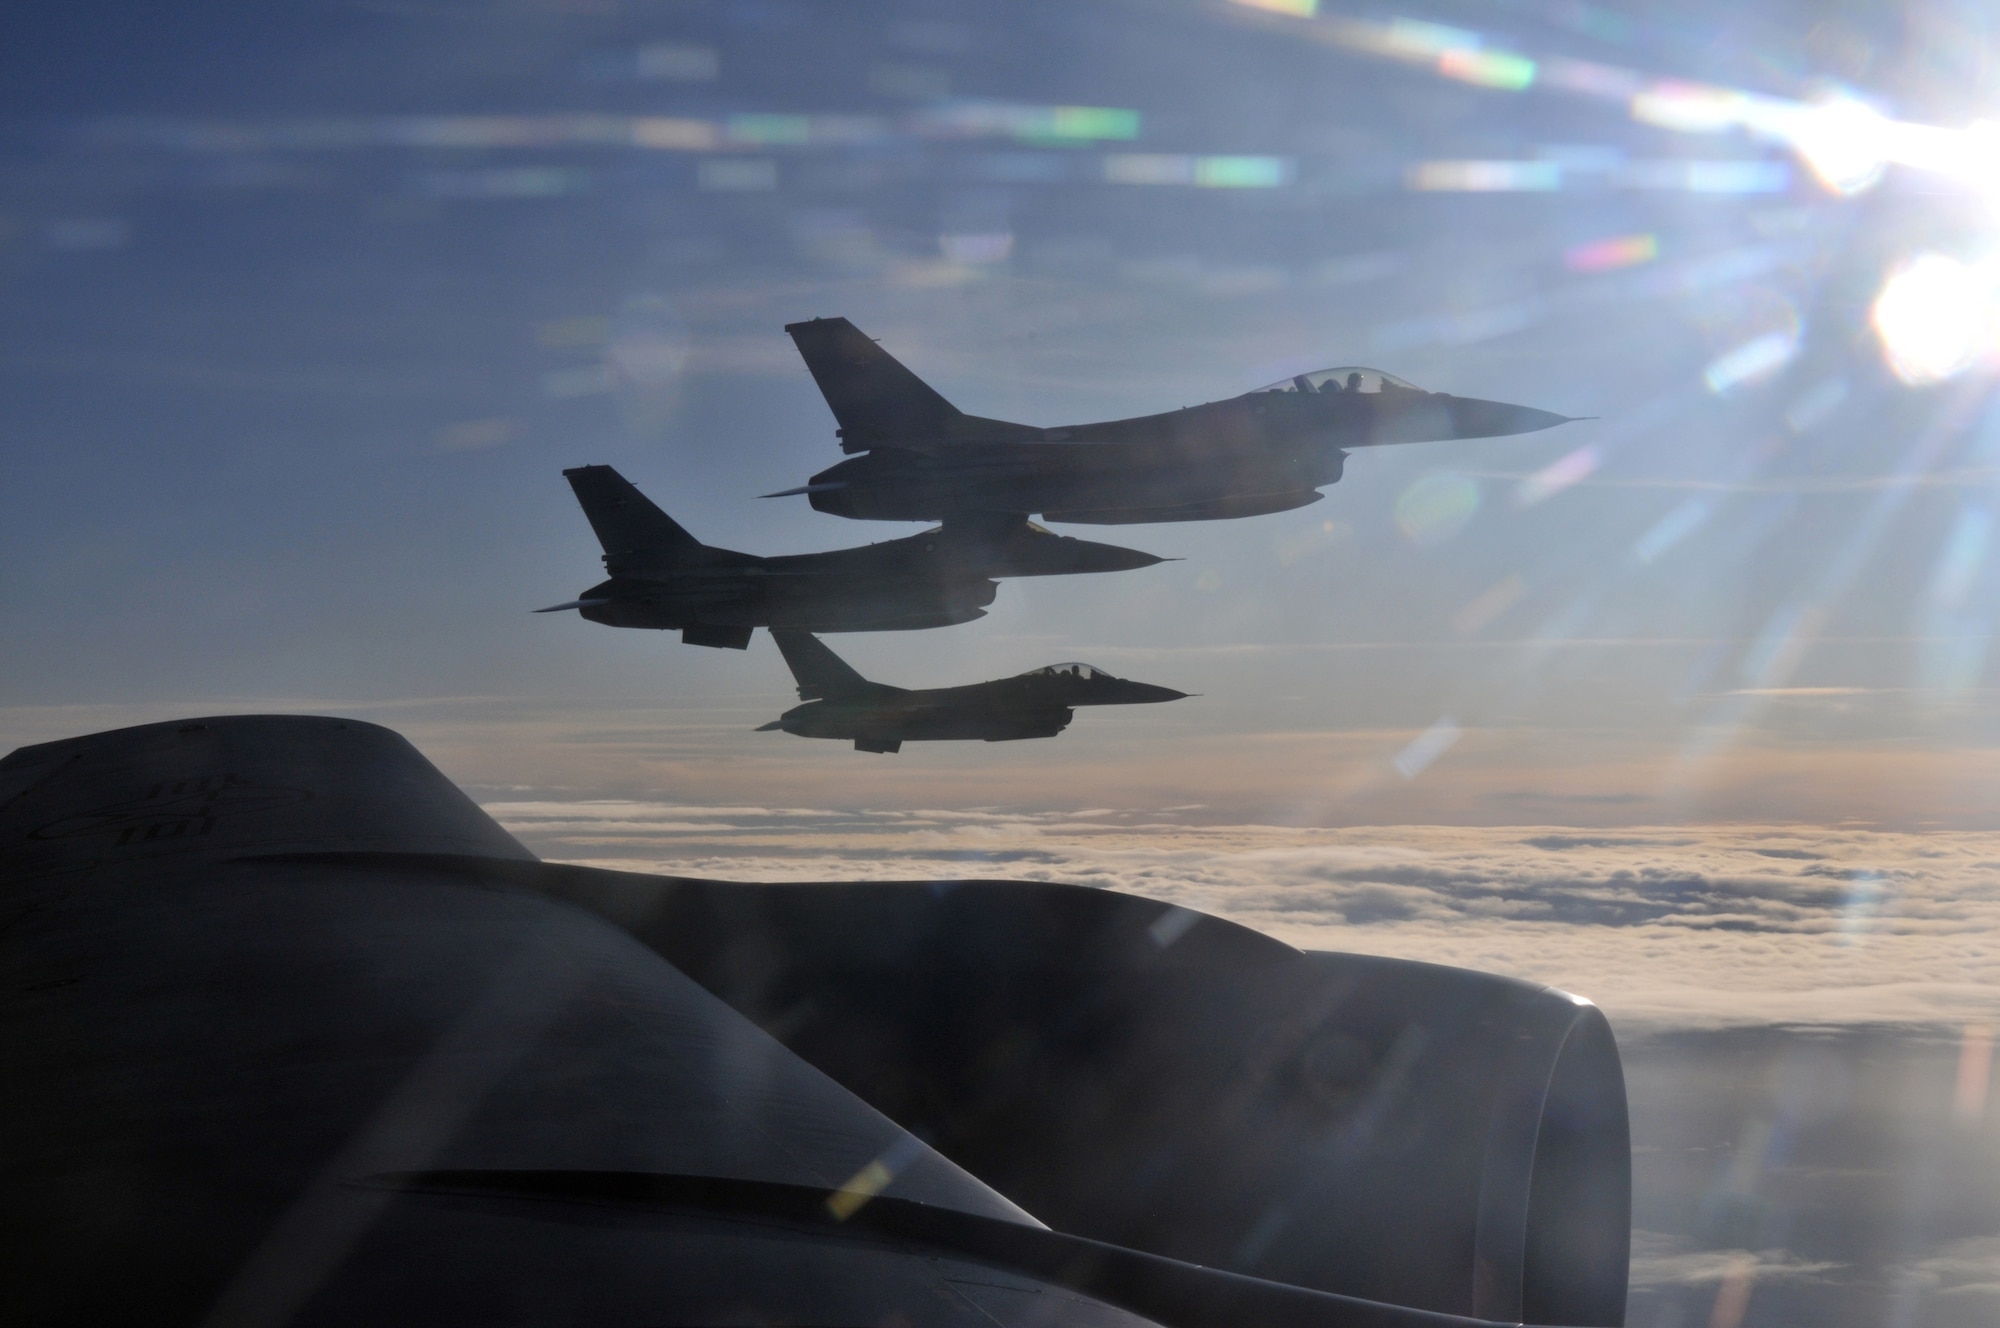 Three Royal Danish Air Force F-16 Fighting Falcons fly off the wing of a KC-135 Stratotanker during a refueling mission over their homeland Dec. 8. The RAF Mildenhall-based Stratotanker refueled 30 aircraft and pumped more than 40,000 tons of fuel in the mission. (U.S. Air Force photo/Tech. Sgt. Kevin Wallace)